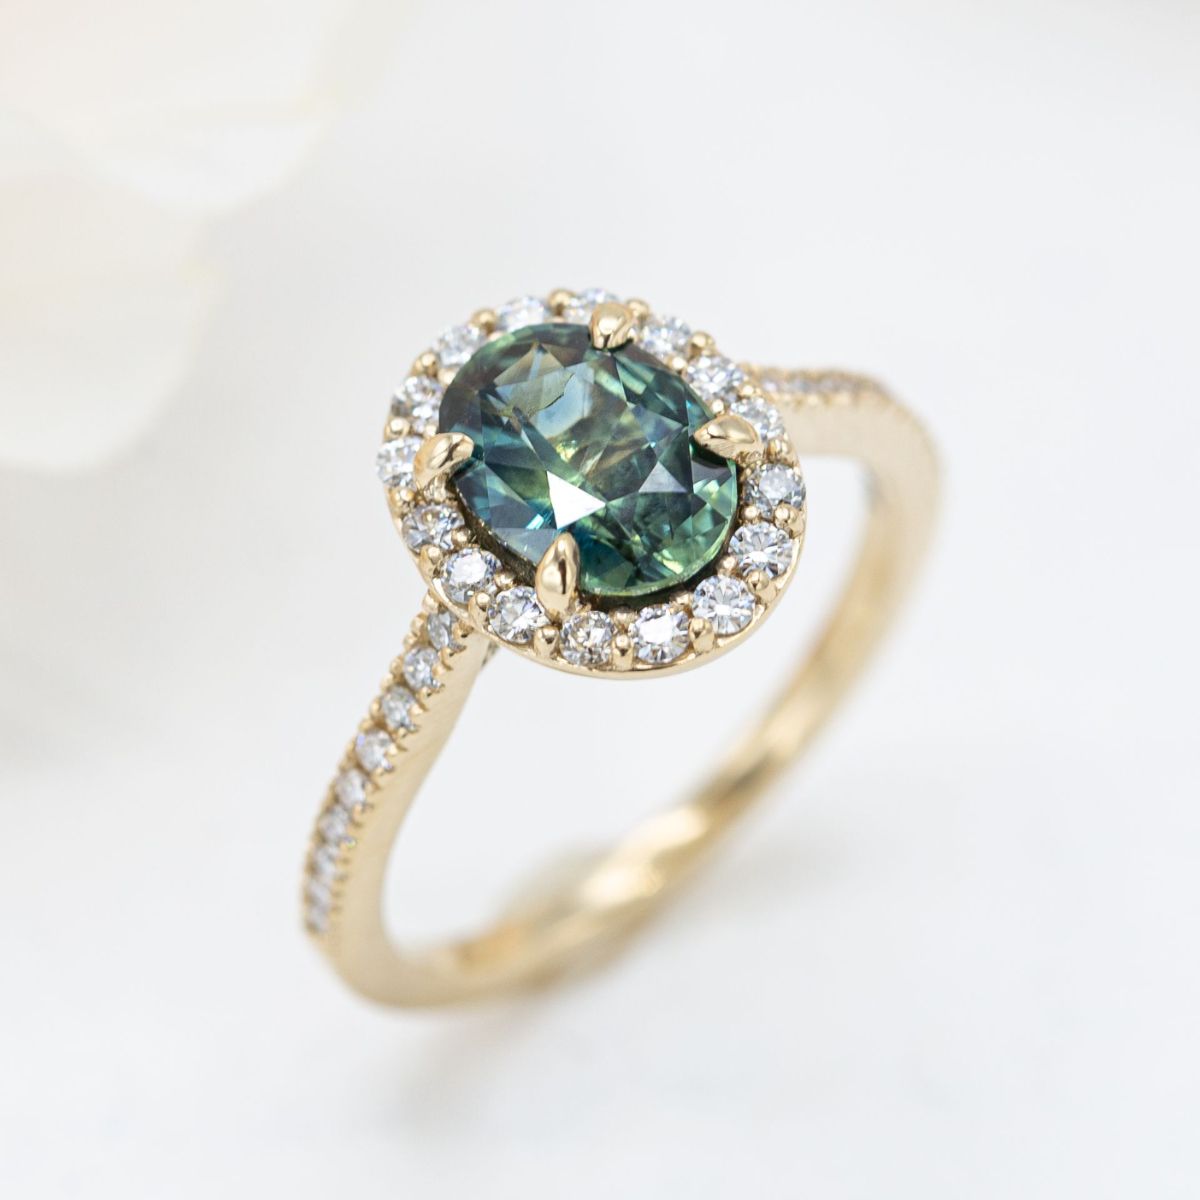 Is sapphire a good choice for an engagement ring? | CustomMade.com